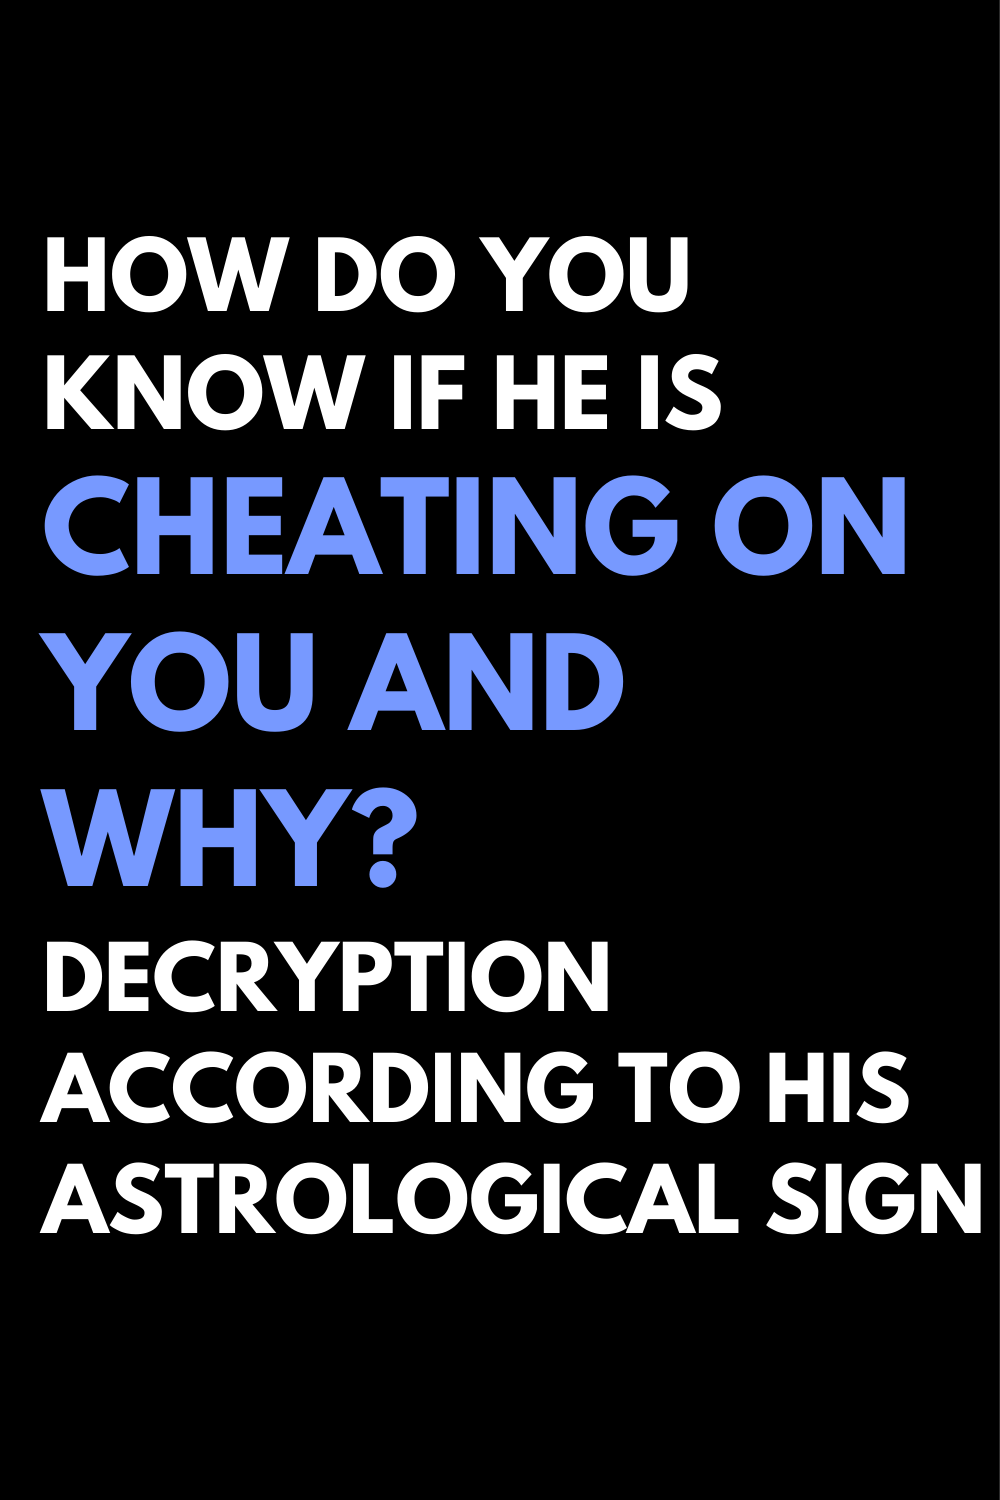 How Do You Know If He Is Cheating On You And Why? Decryption according to his astrological sign